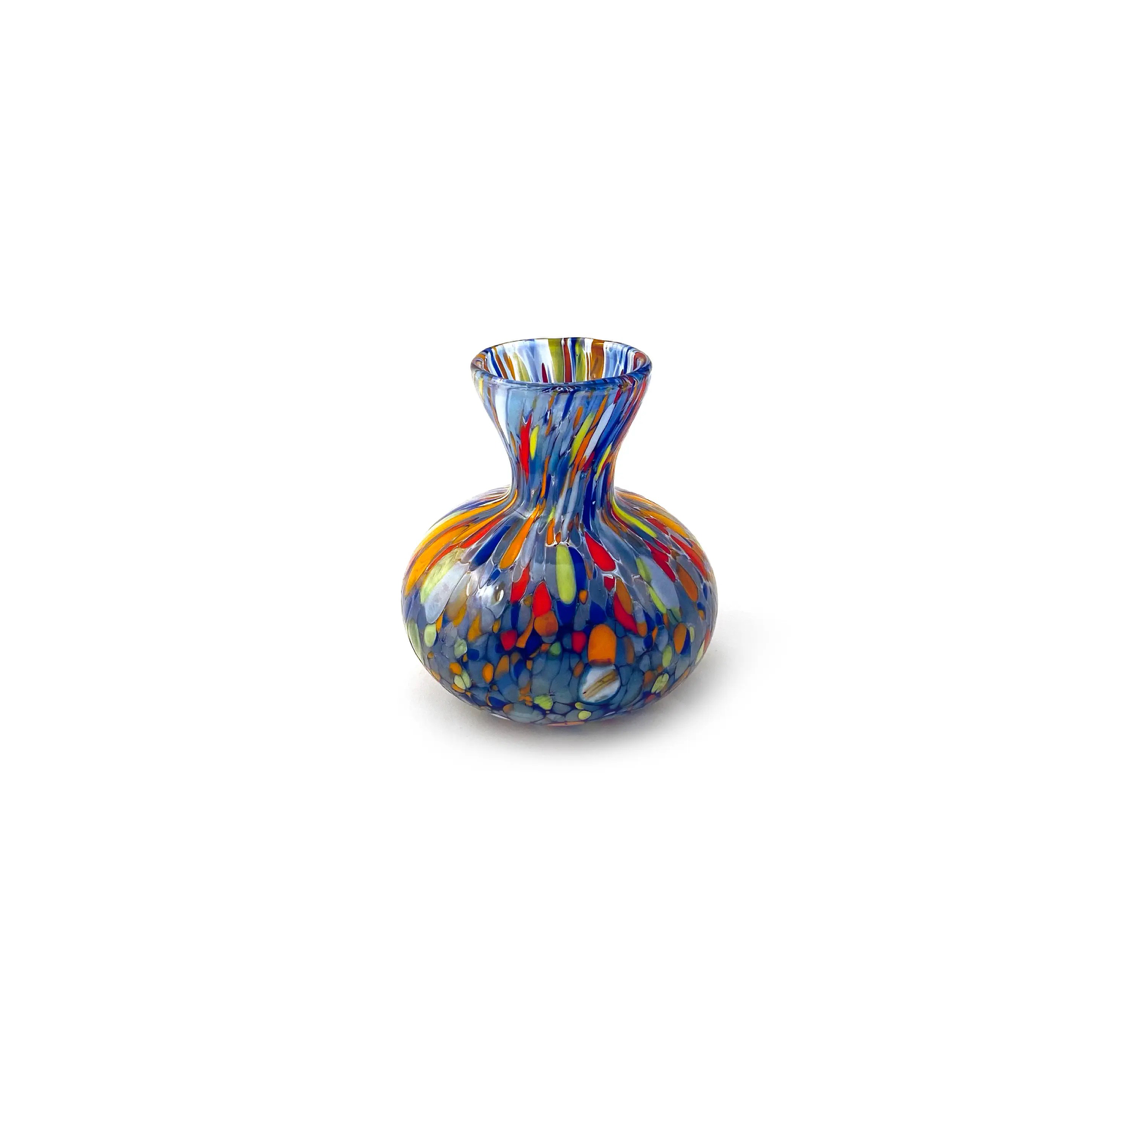 small blue glass vase with round bottom and fluted top, covered in colourful splatters of blue, red, green and orange